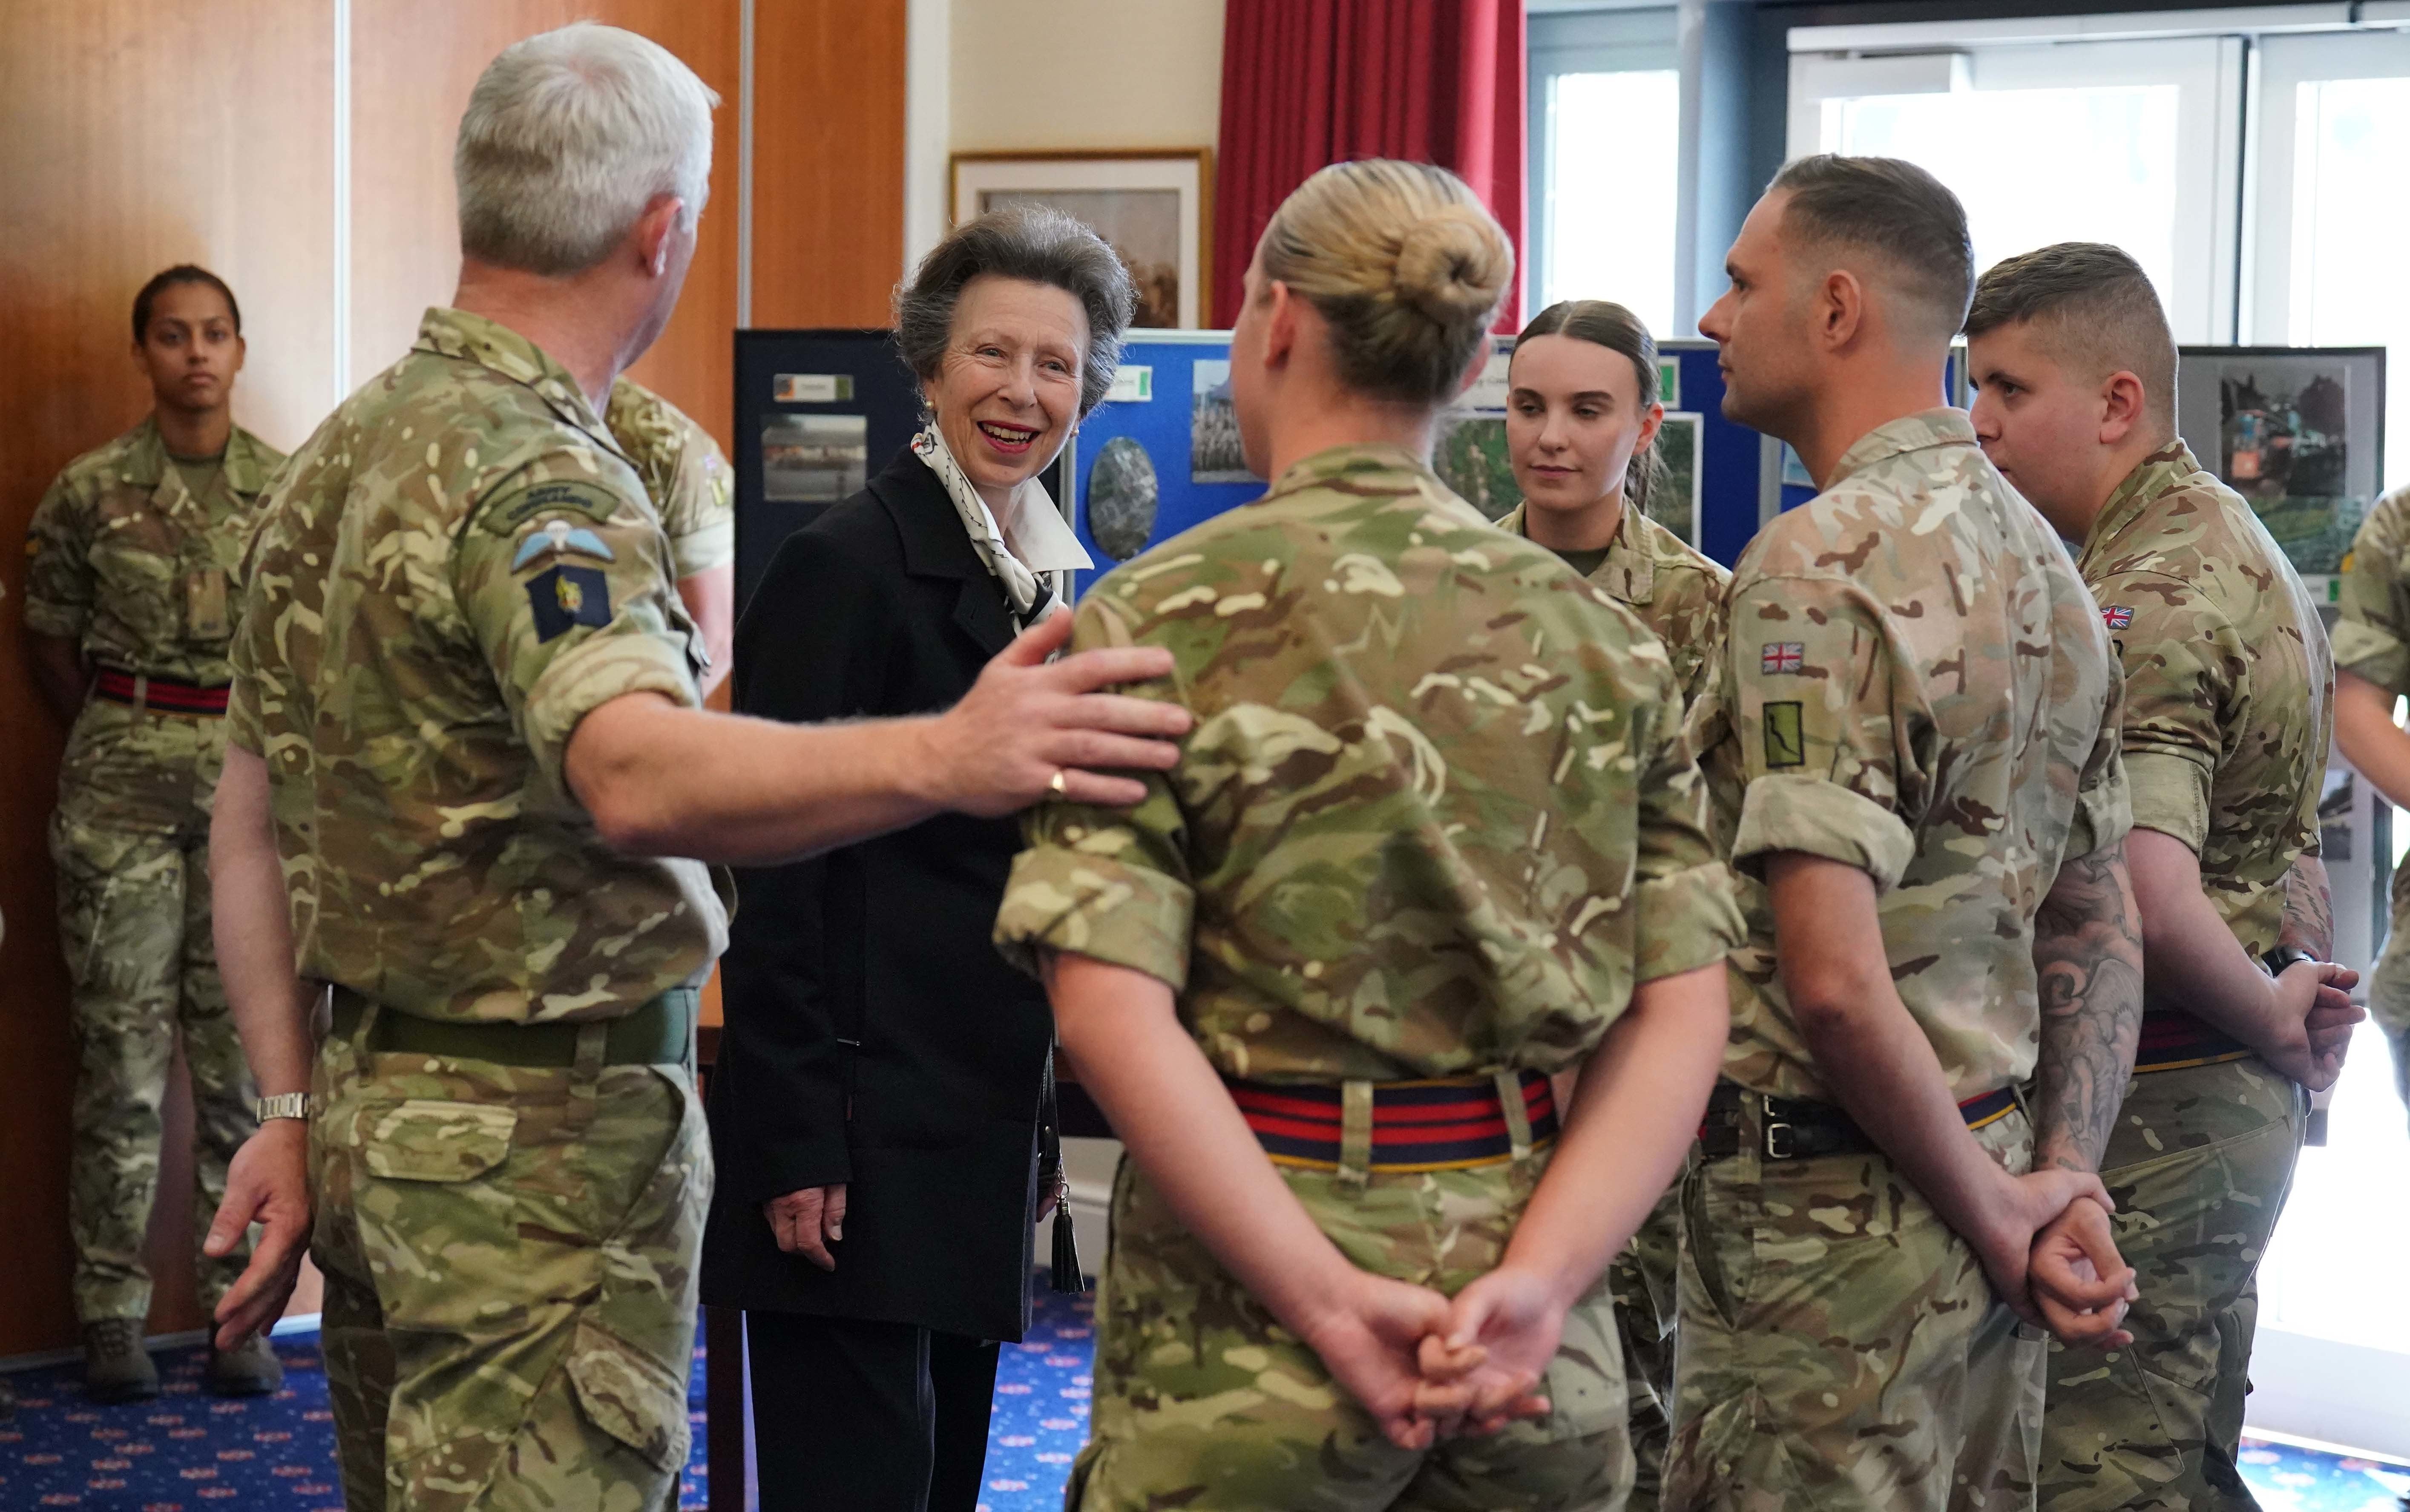 Princess Anne is Colonel-in-Chief of the Royal Corps of Signals and the Royal Logistic Corps